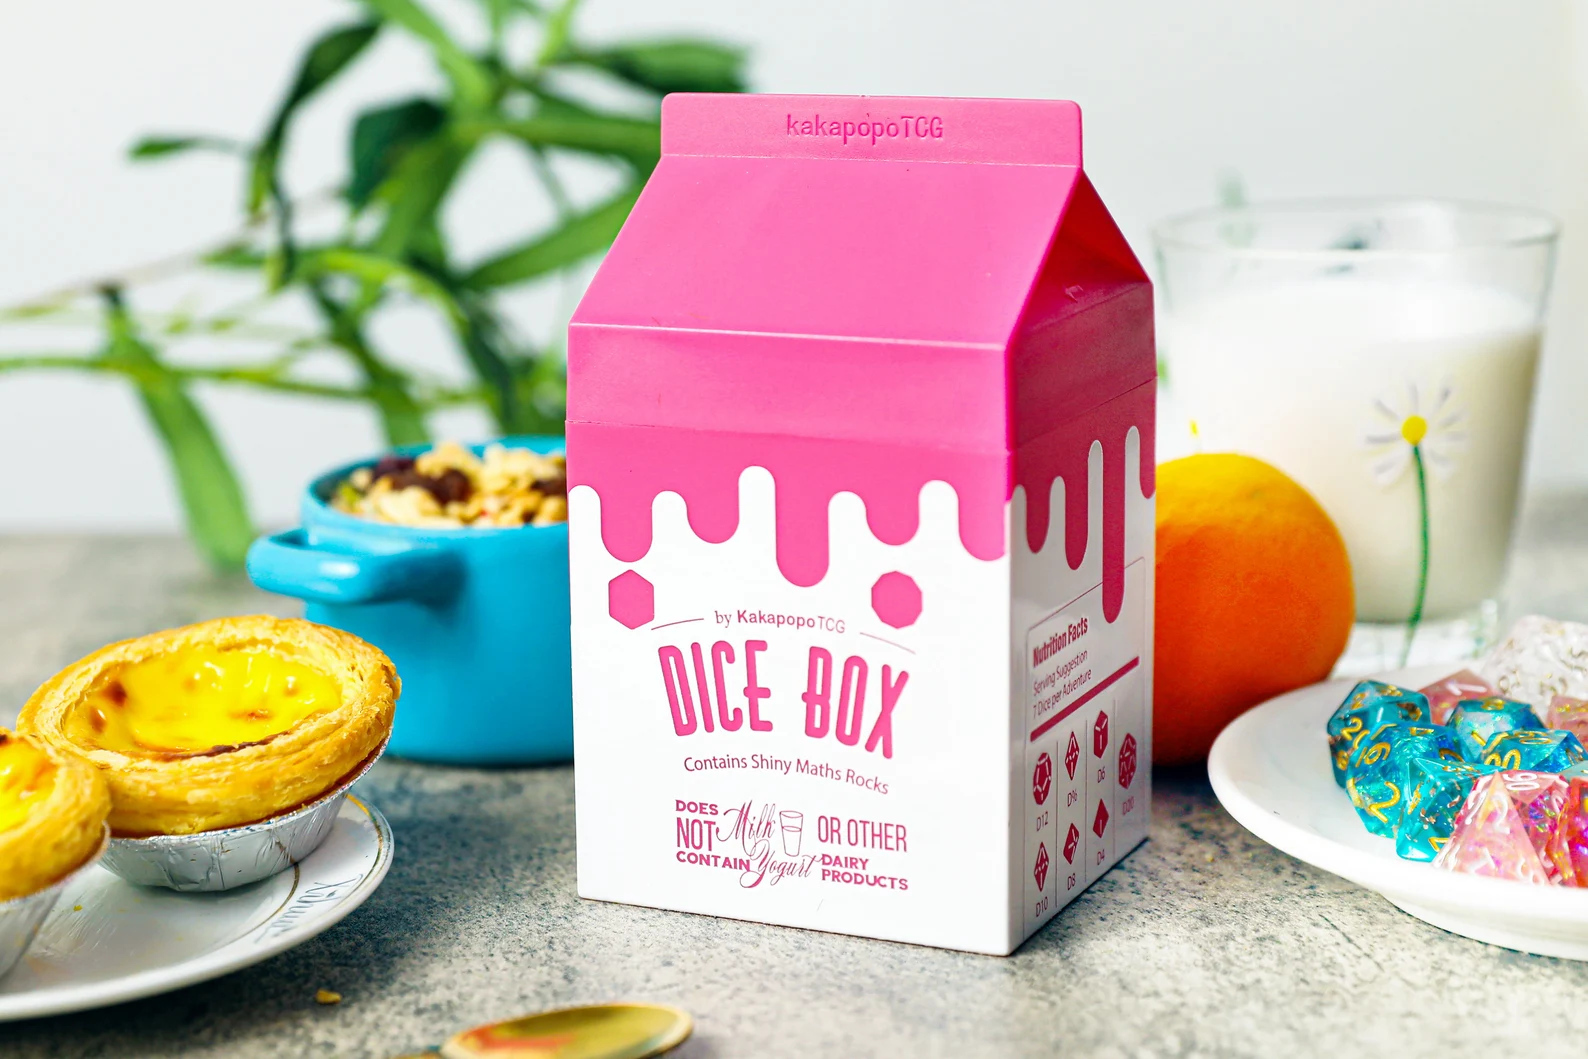 A photo of a pink and white plastic milk carton that says Dice Box on the front.  From left to right, the box is staged with egg tarts, granola, an orange, milk and a plate of blue and pink dice. 